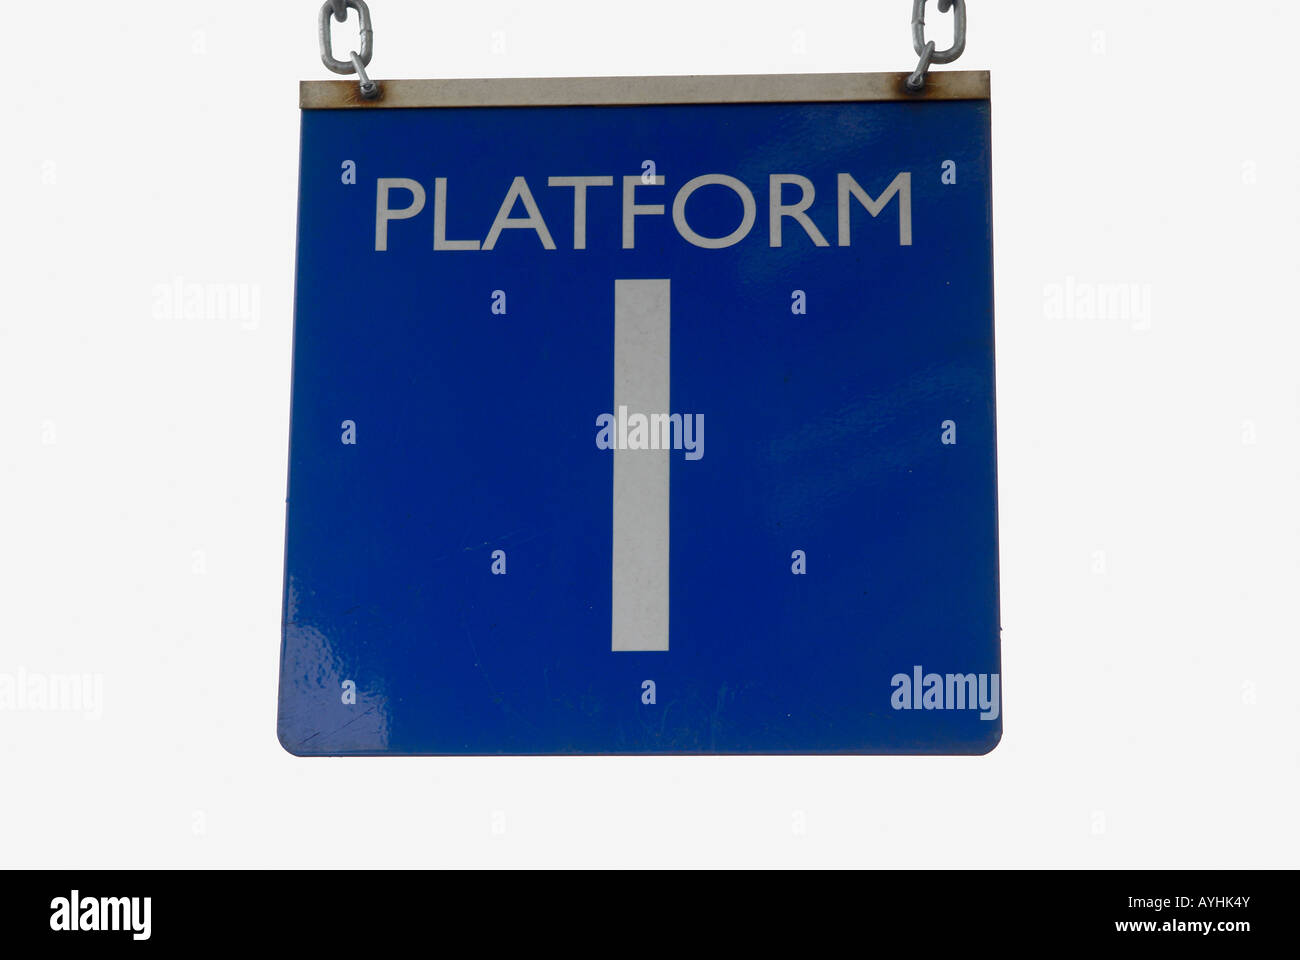 Platform 1 - railway sign with white text on former BR eastern region blue background. Stock Photo